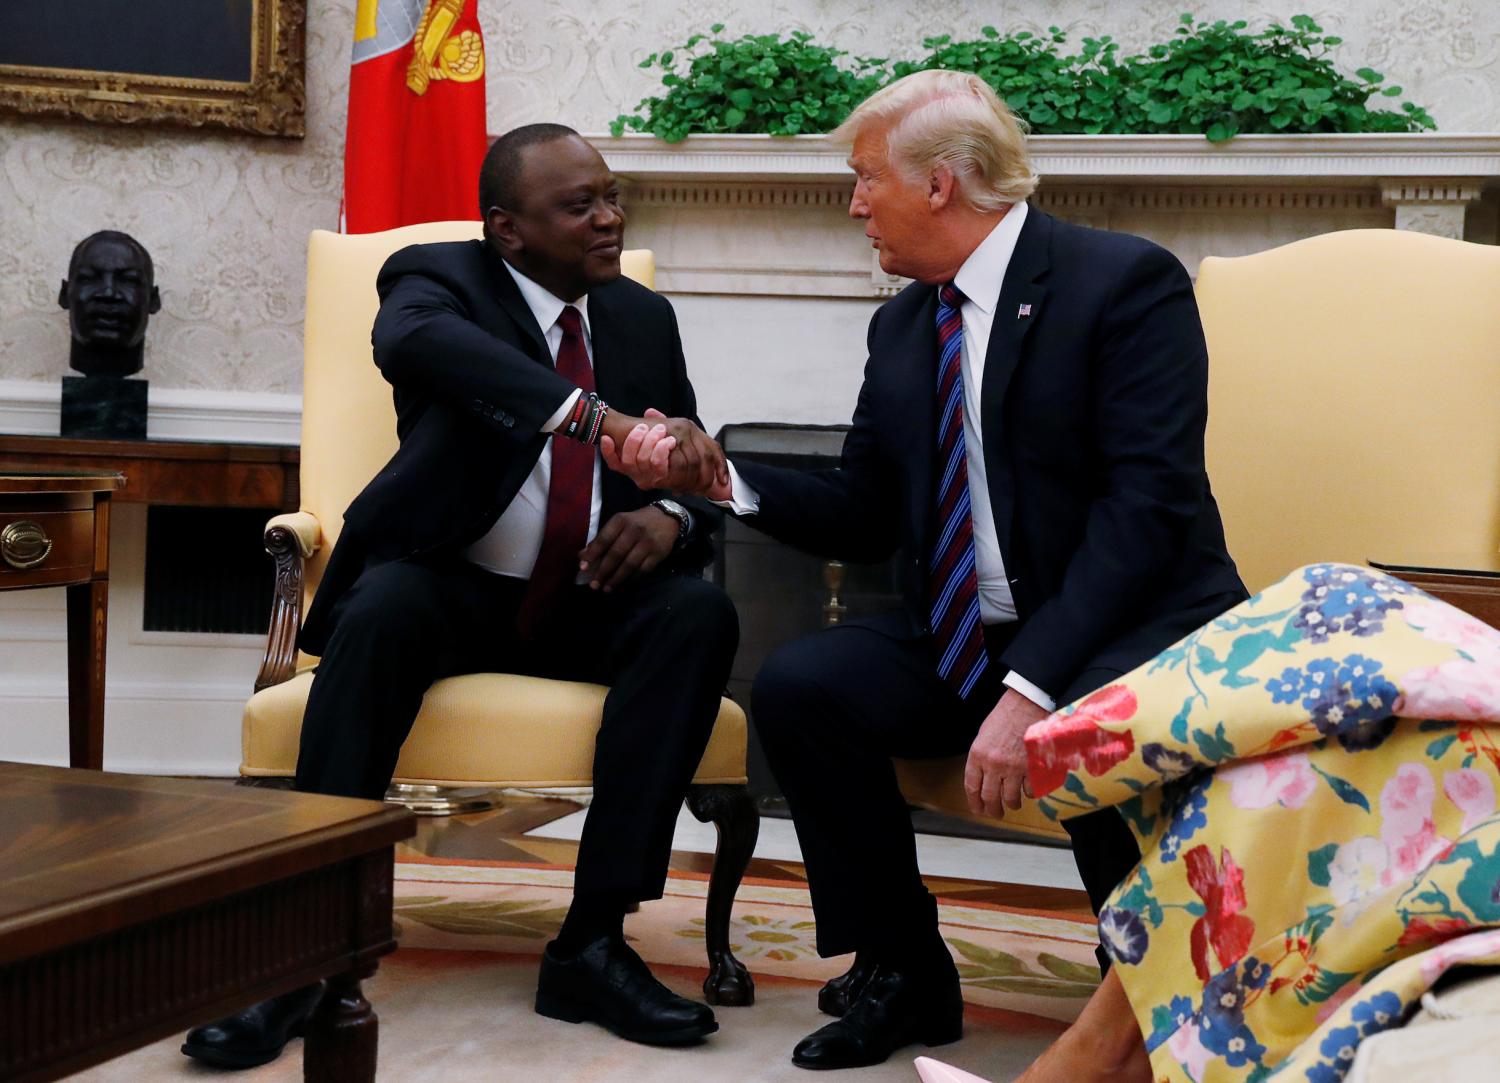 Kenya's President Uhuru Kenyatta shakes hands with U.S. President Donald Trump as they meet in the Oval Office at the White House in Washington, U.S., August 27, 2018. REUTERS/Leah Millis - RC1D0C9E7900